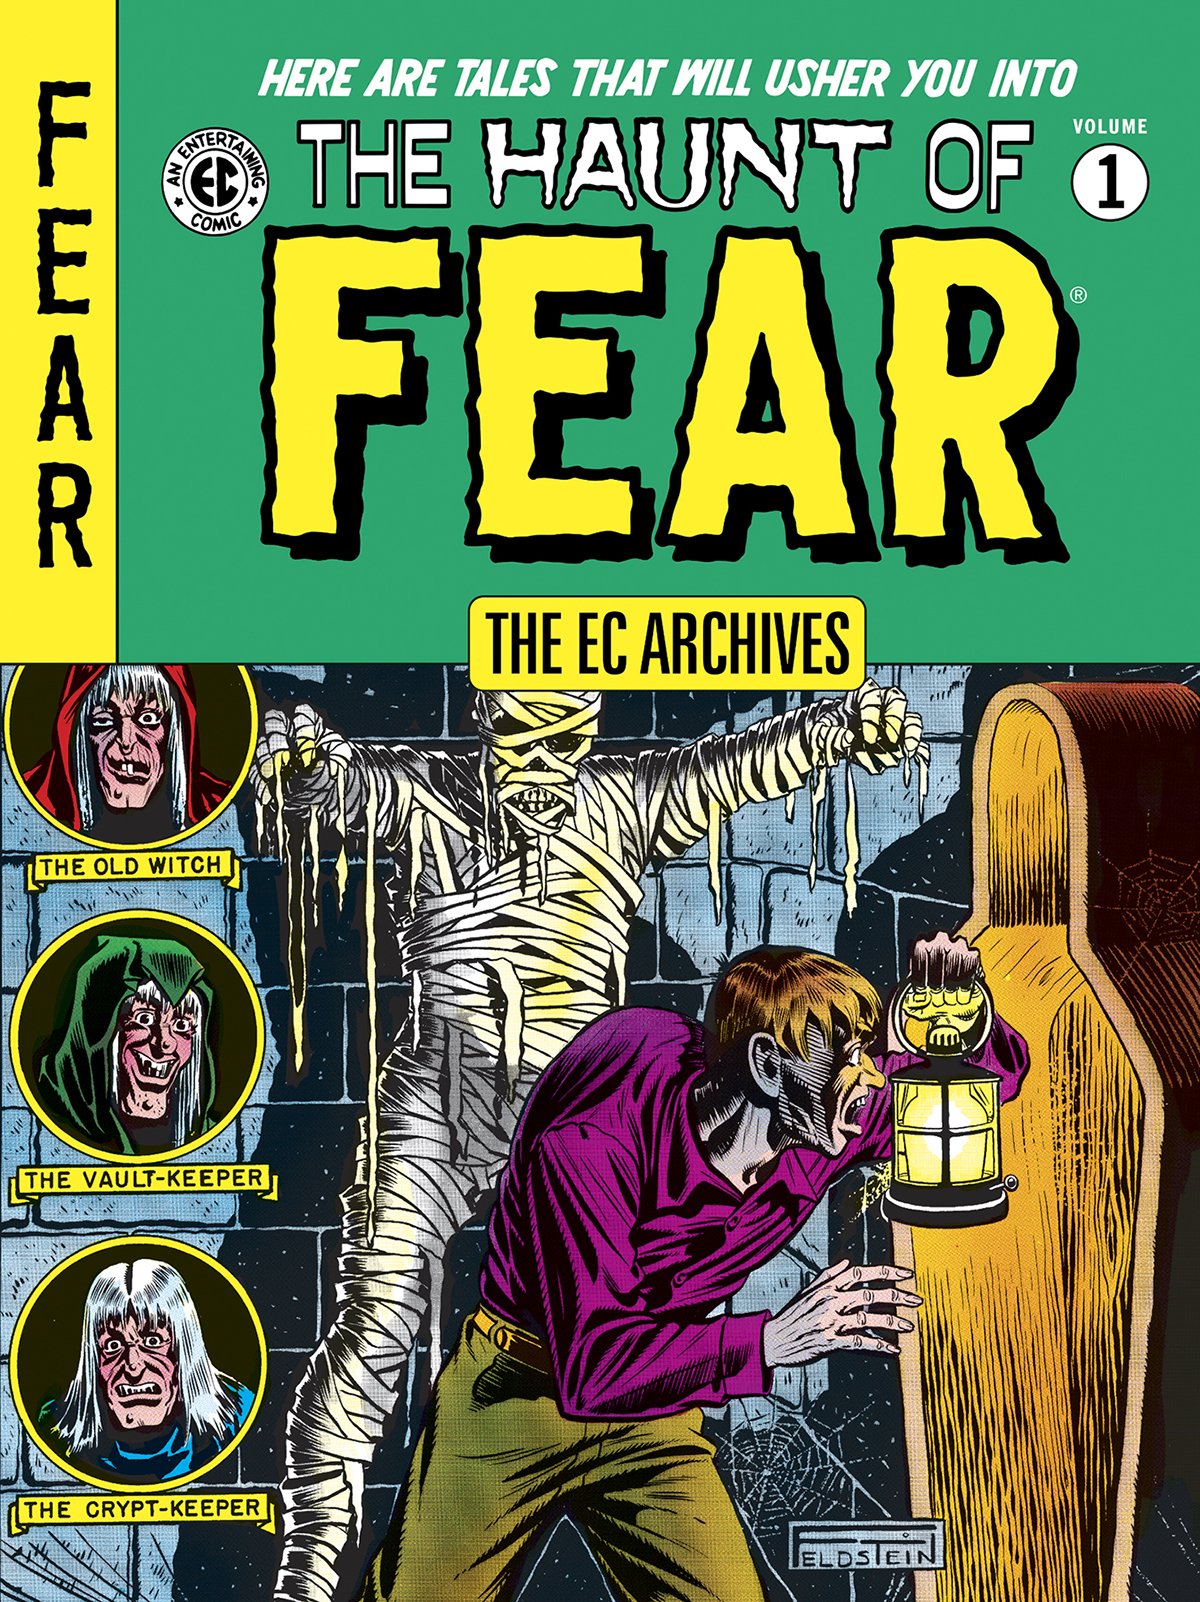 EC Archives the Haunt of Fear Graphic Novel 1